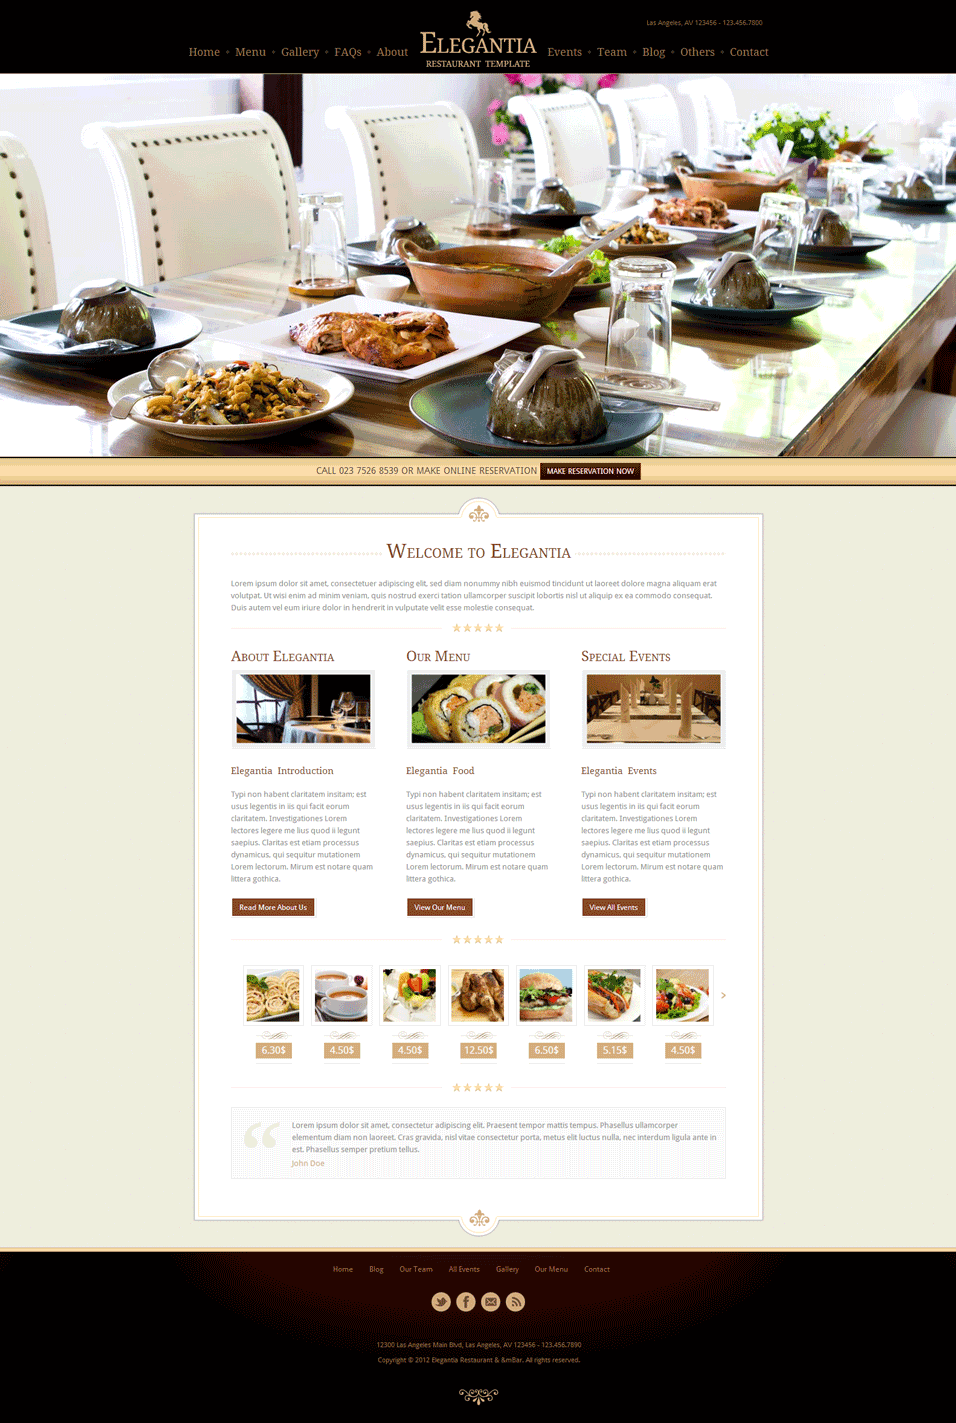 http://www.template.net/wp-content/uploads/2014/07/Elegantia-Restaurant-and-Cafe-HTML-Template.gif